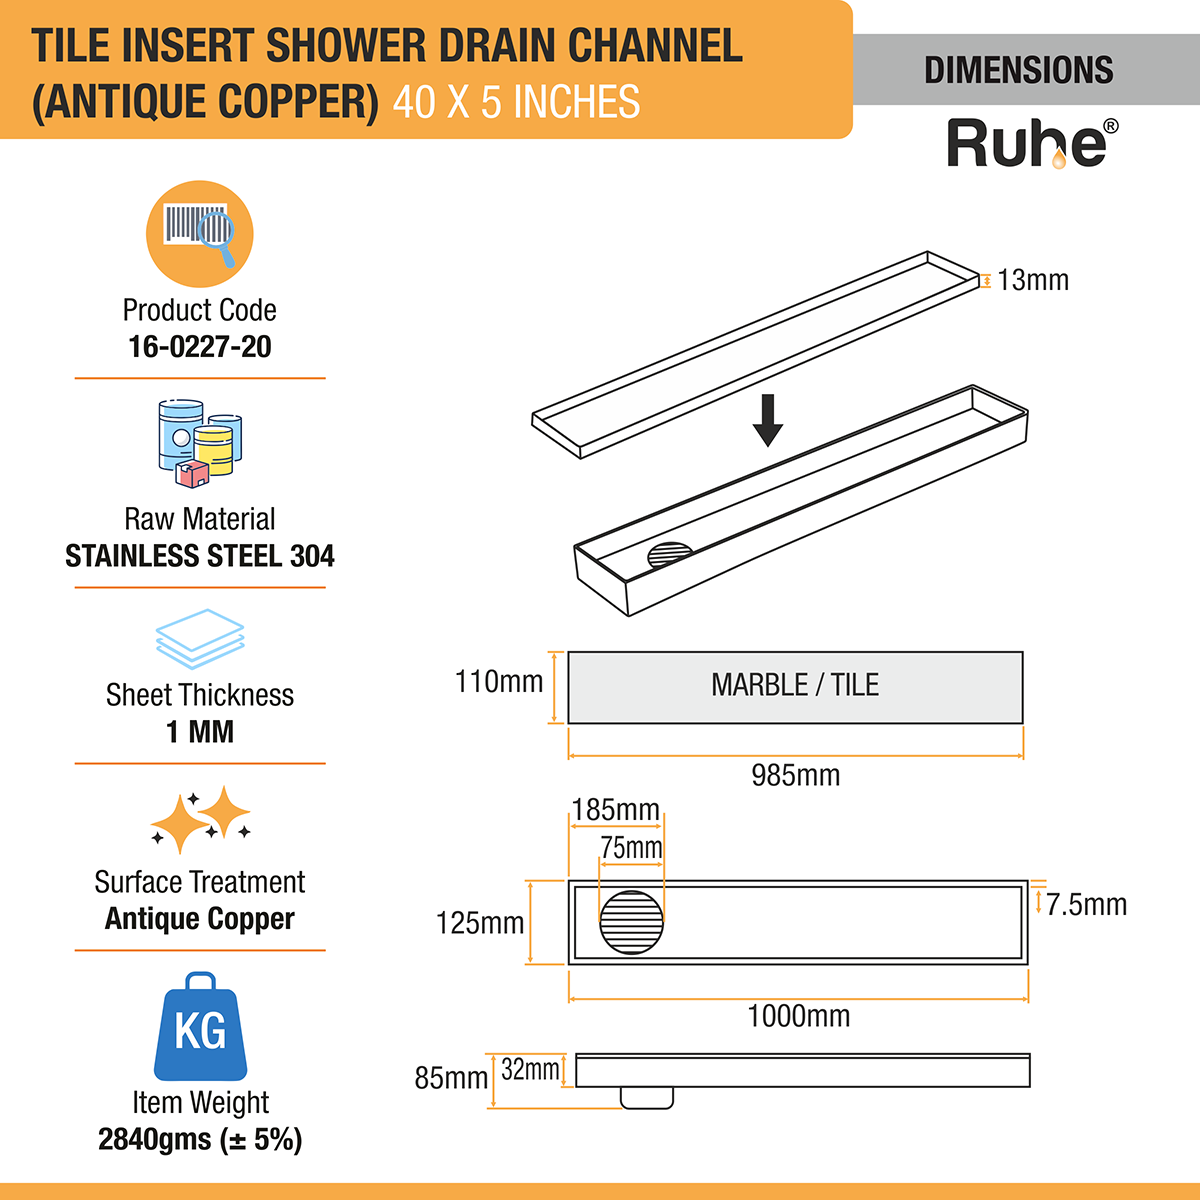 Tile Insert Shower Drain Channel (40 x 5 Inches) ROSE GOLD PVD Coated dimensions and sizes